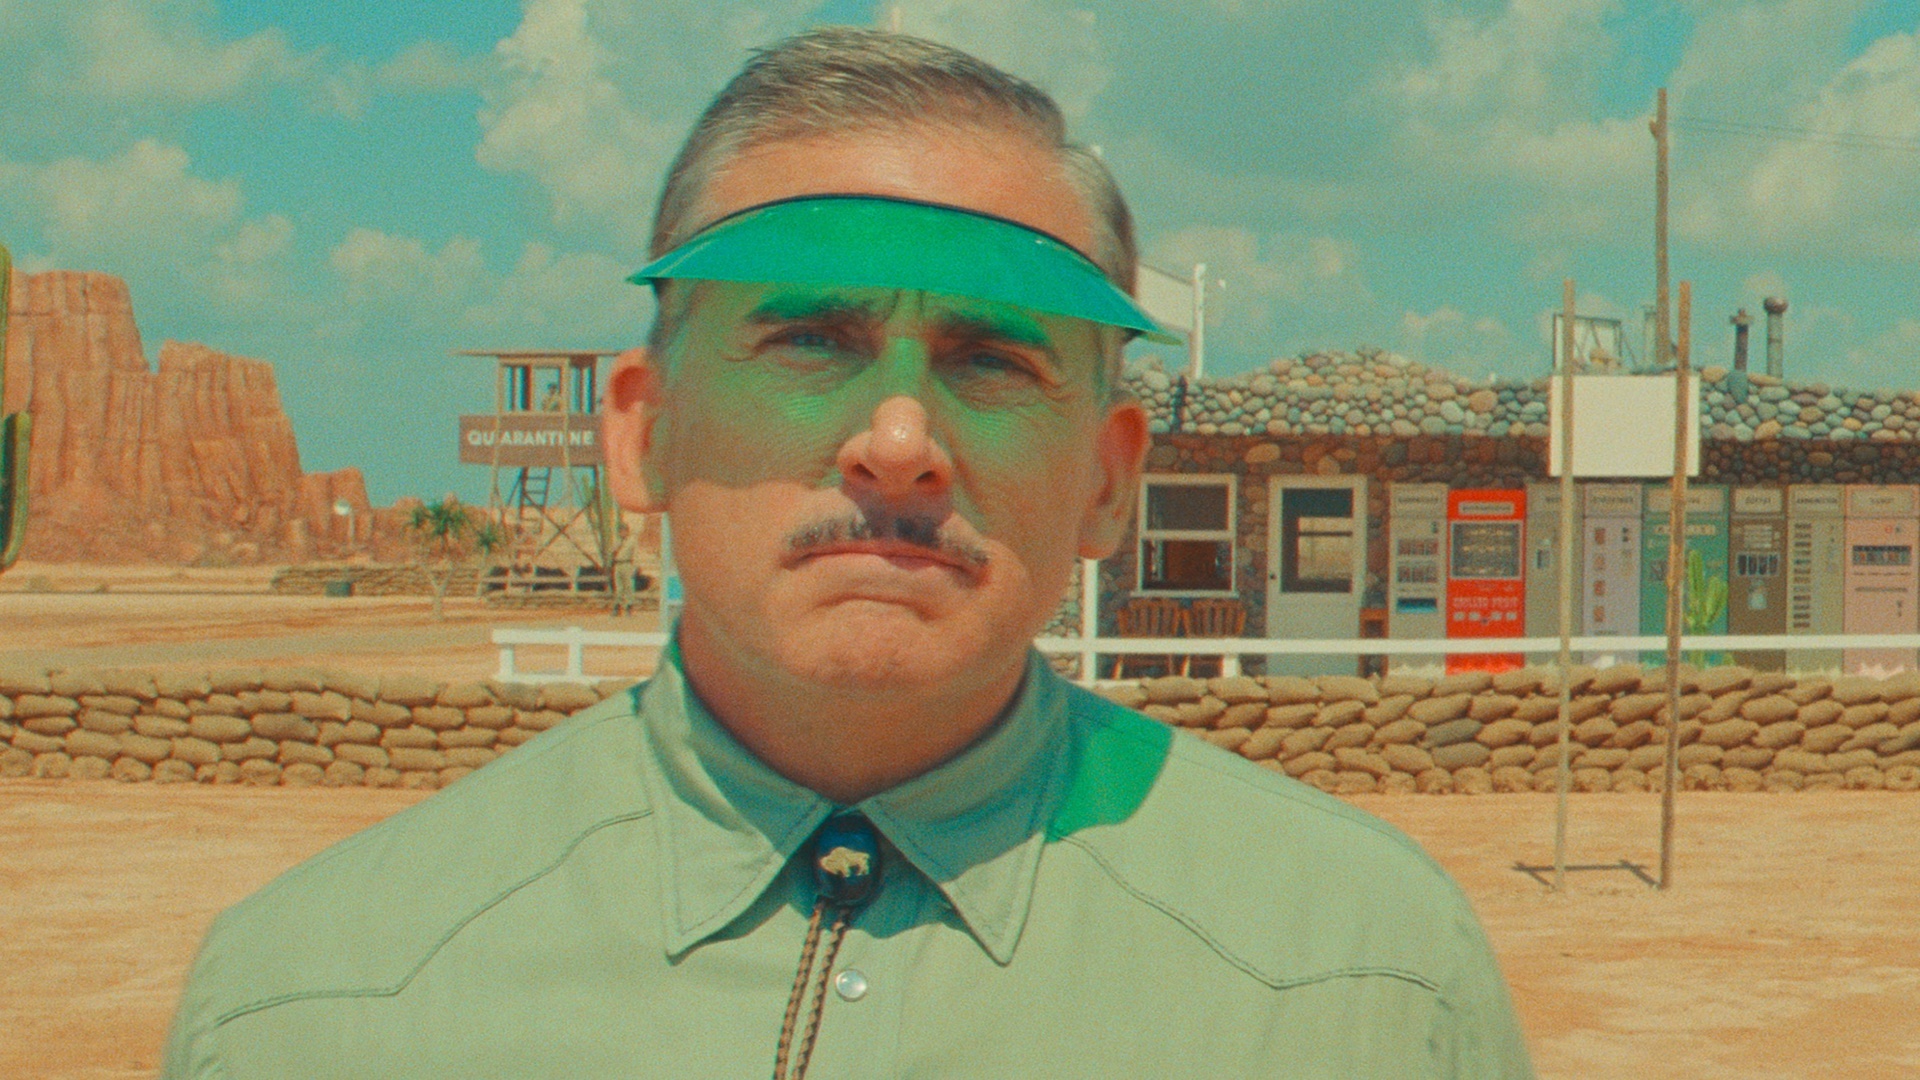 There’s no escape from the tedium: Steve Carell in Wes Anderson’s Asteroid City. Photo: Pop. 87 Productions/Focus Features 